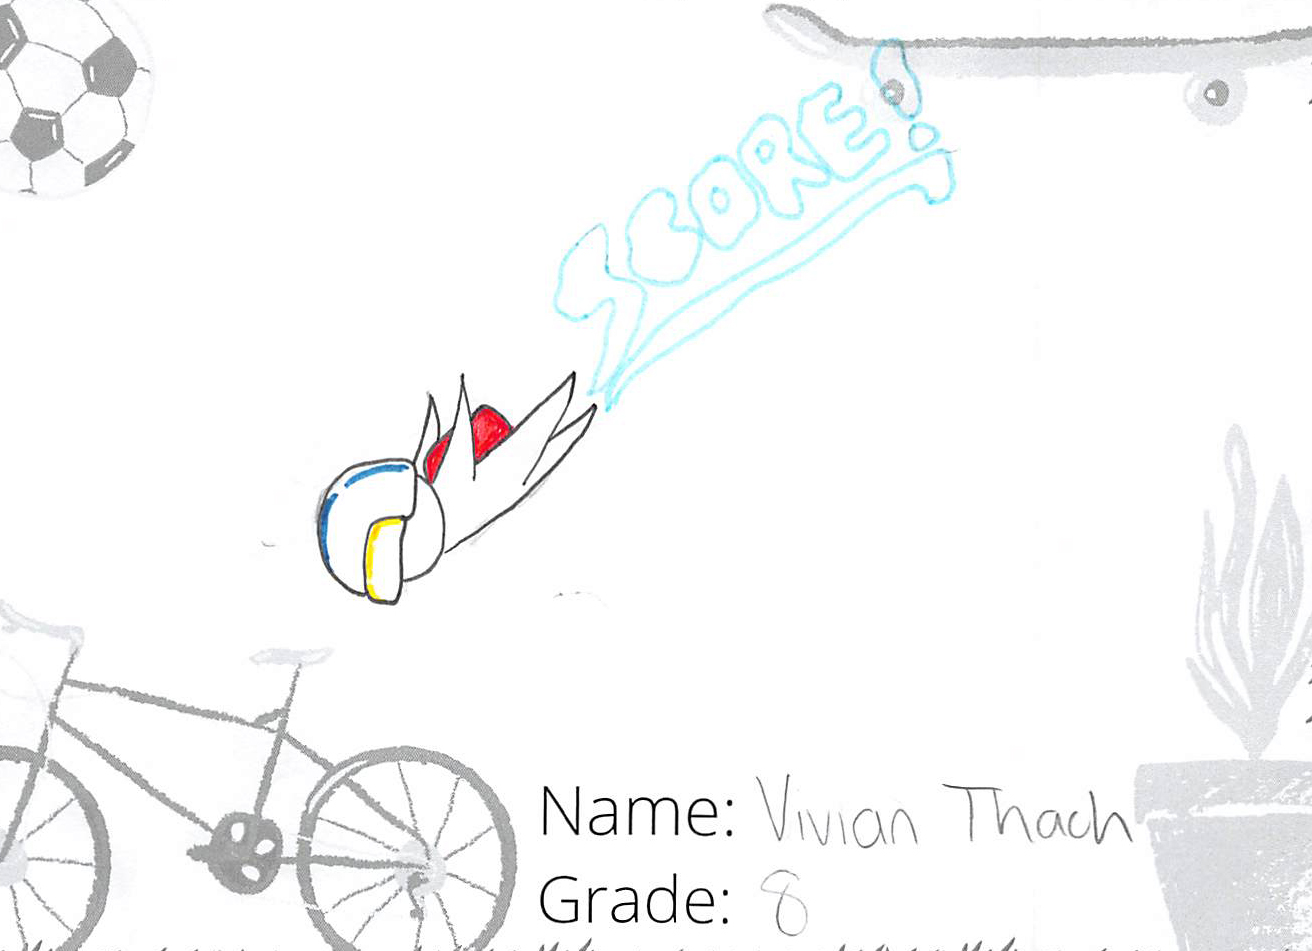 Marker drawing for the SCORE! logo contest. The drawing includes a person skydiving.